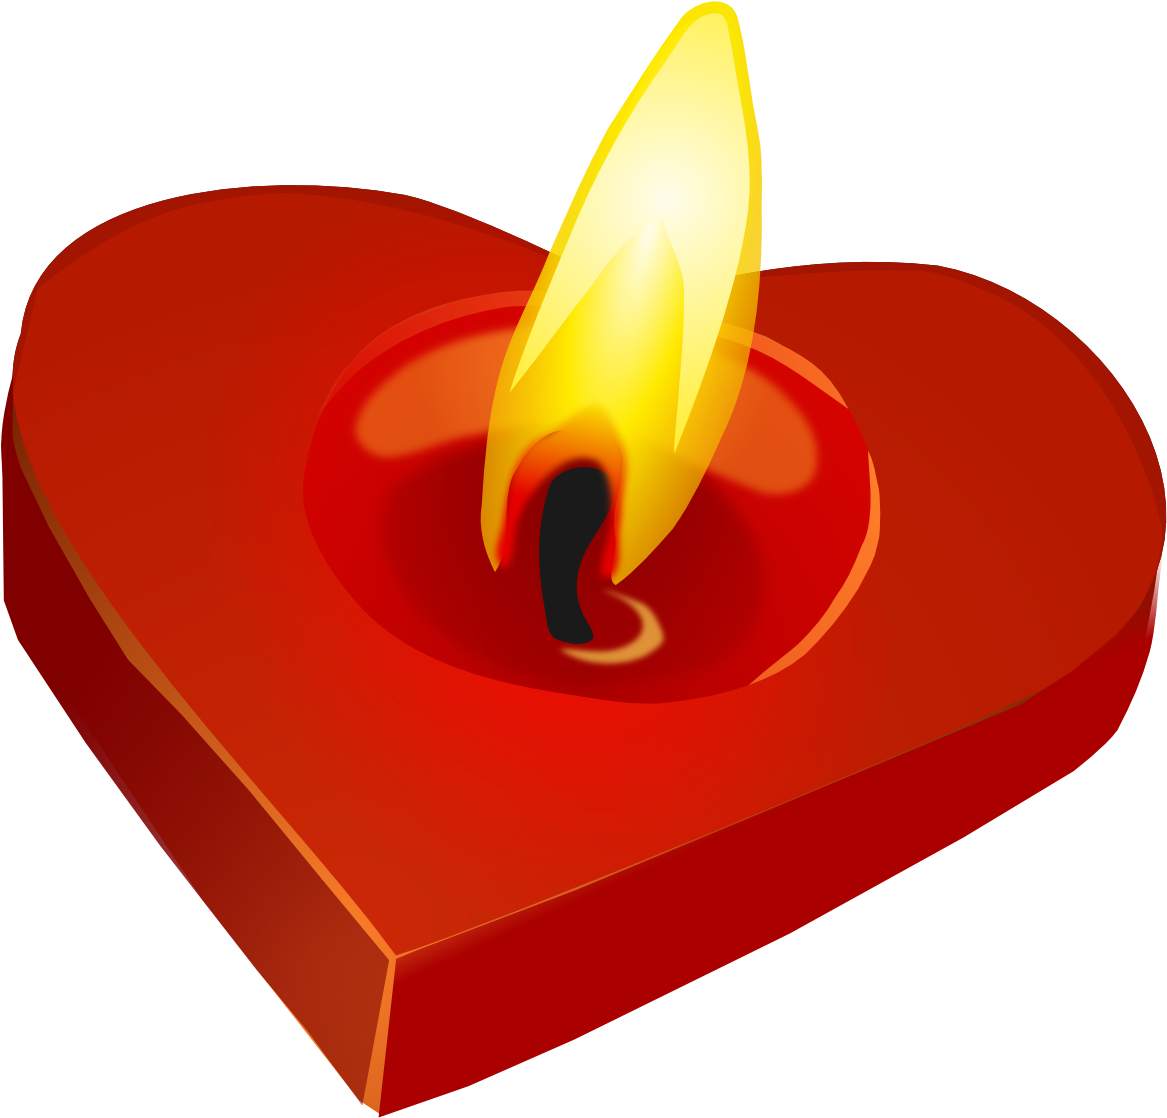 Red Candle Clip Art - Heart Candle Clipart (1190x1185)